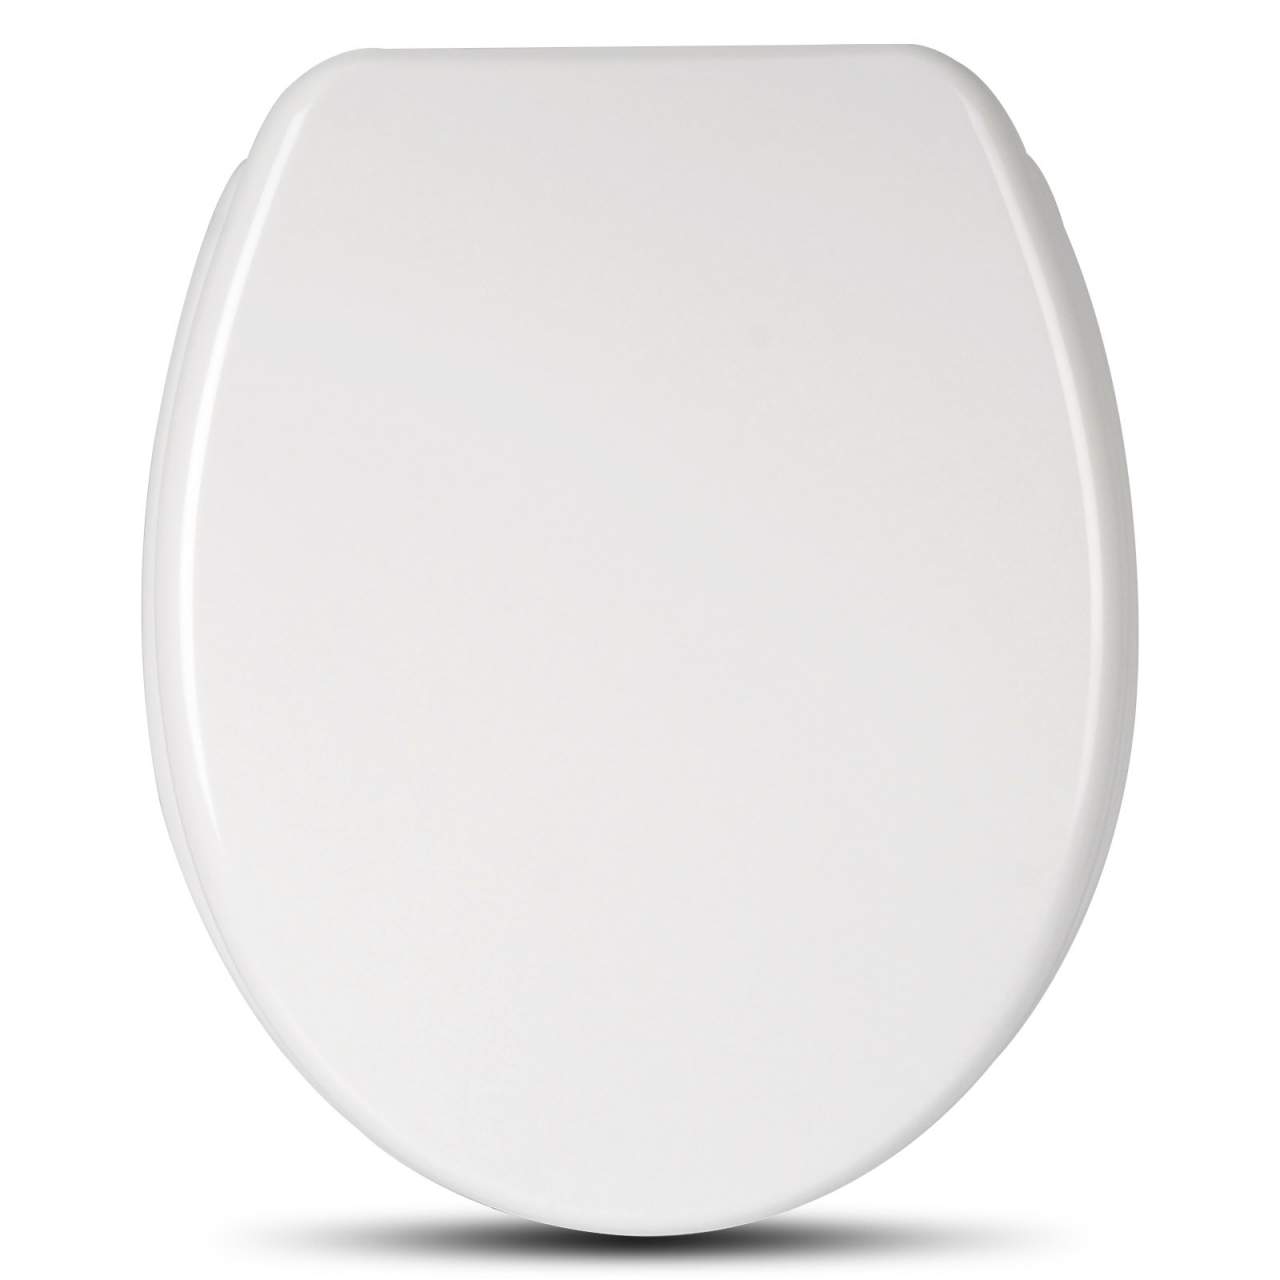 Toilet Lid Loo Cover for Family Bathroom with Assemble Fixtures Duroplast WOLTU Soft Close Toilet Seat Anti-Bacterial Toilet Seats with Adjustable Hinge 